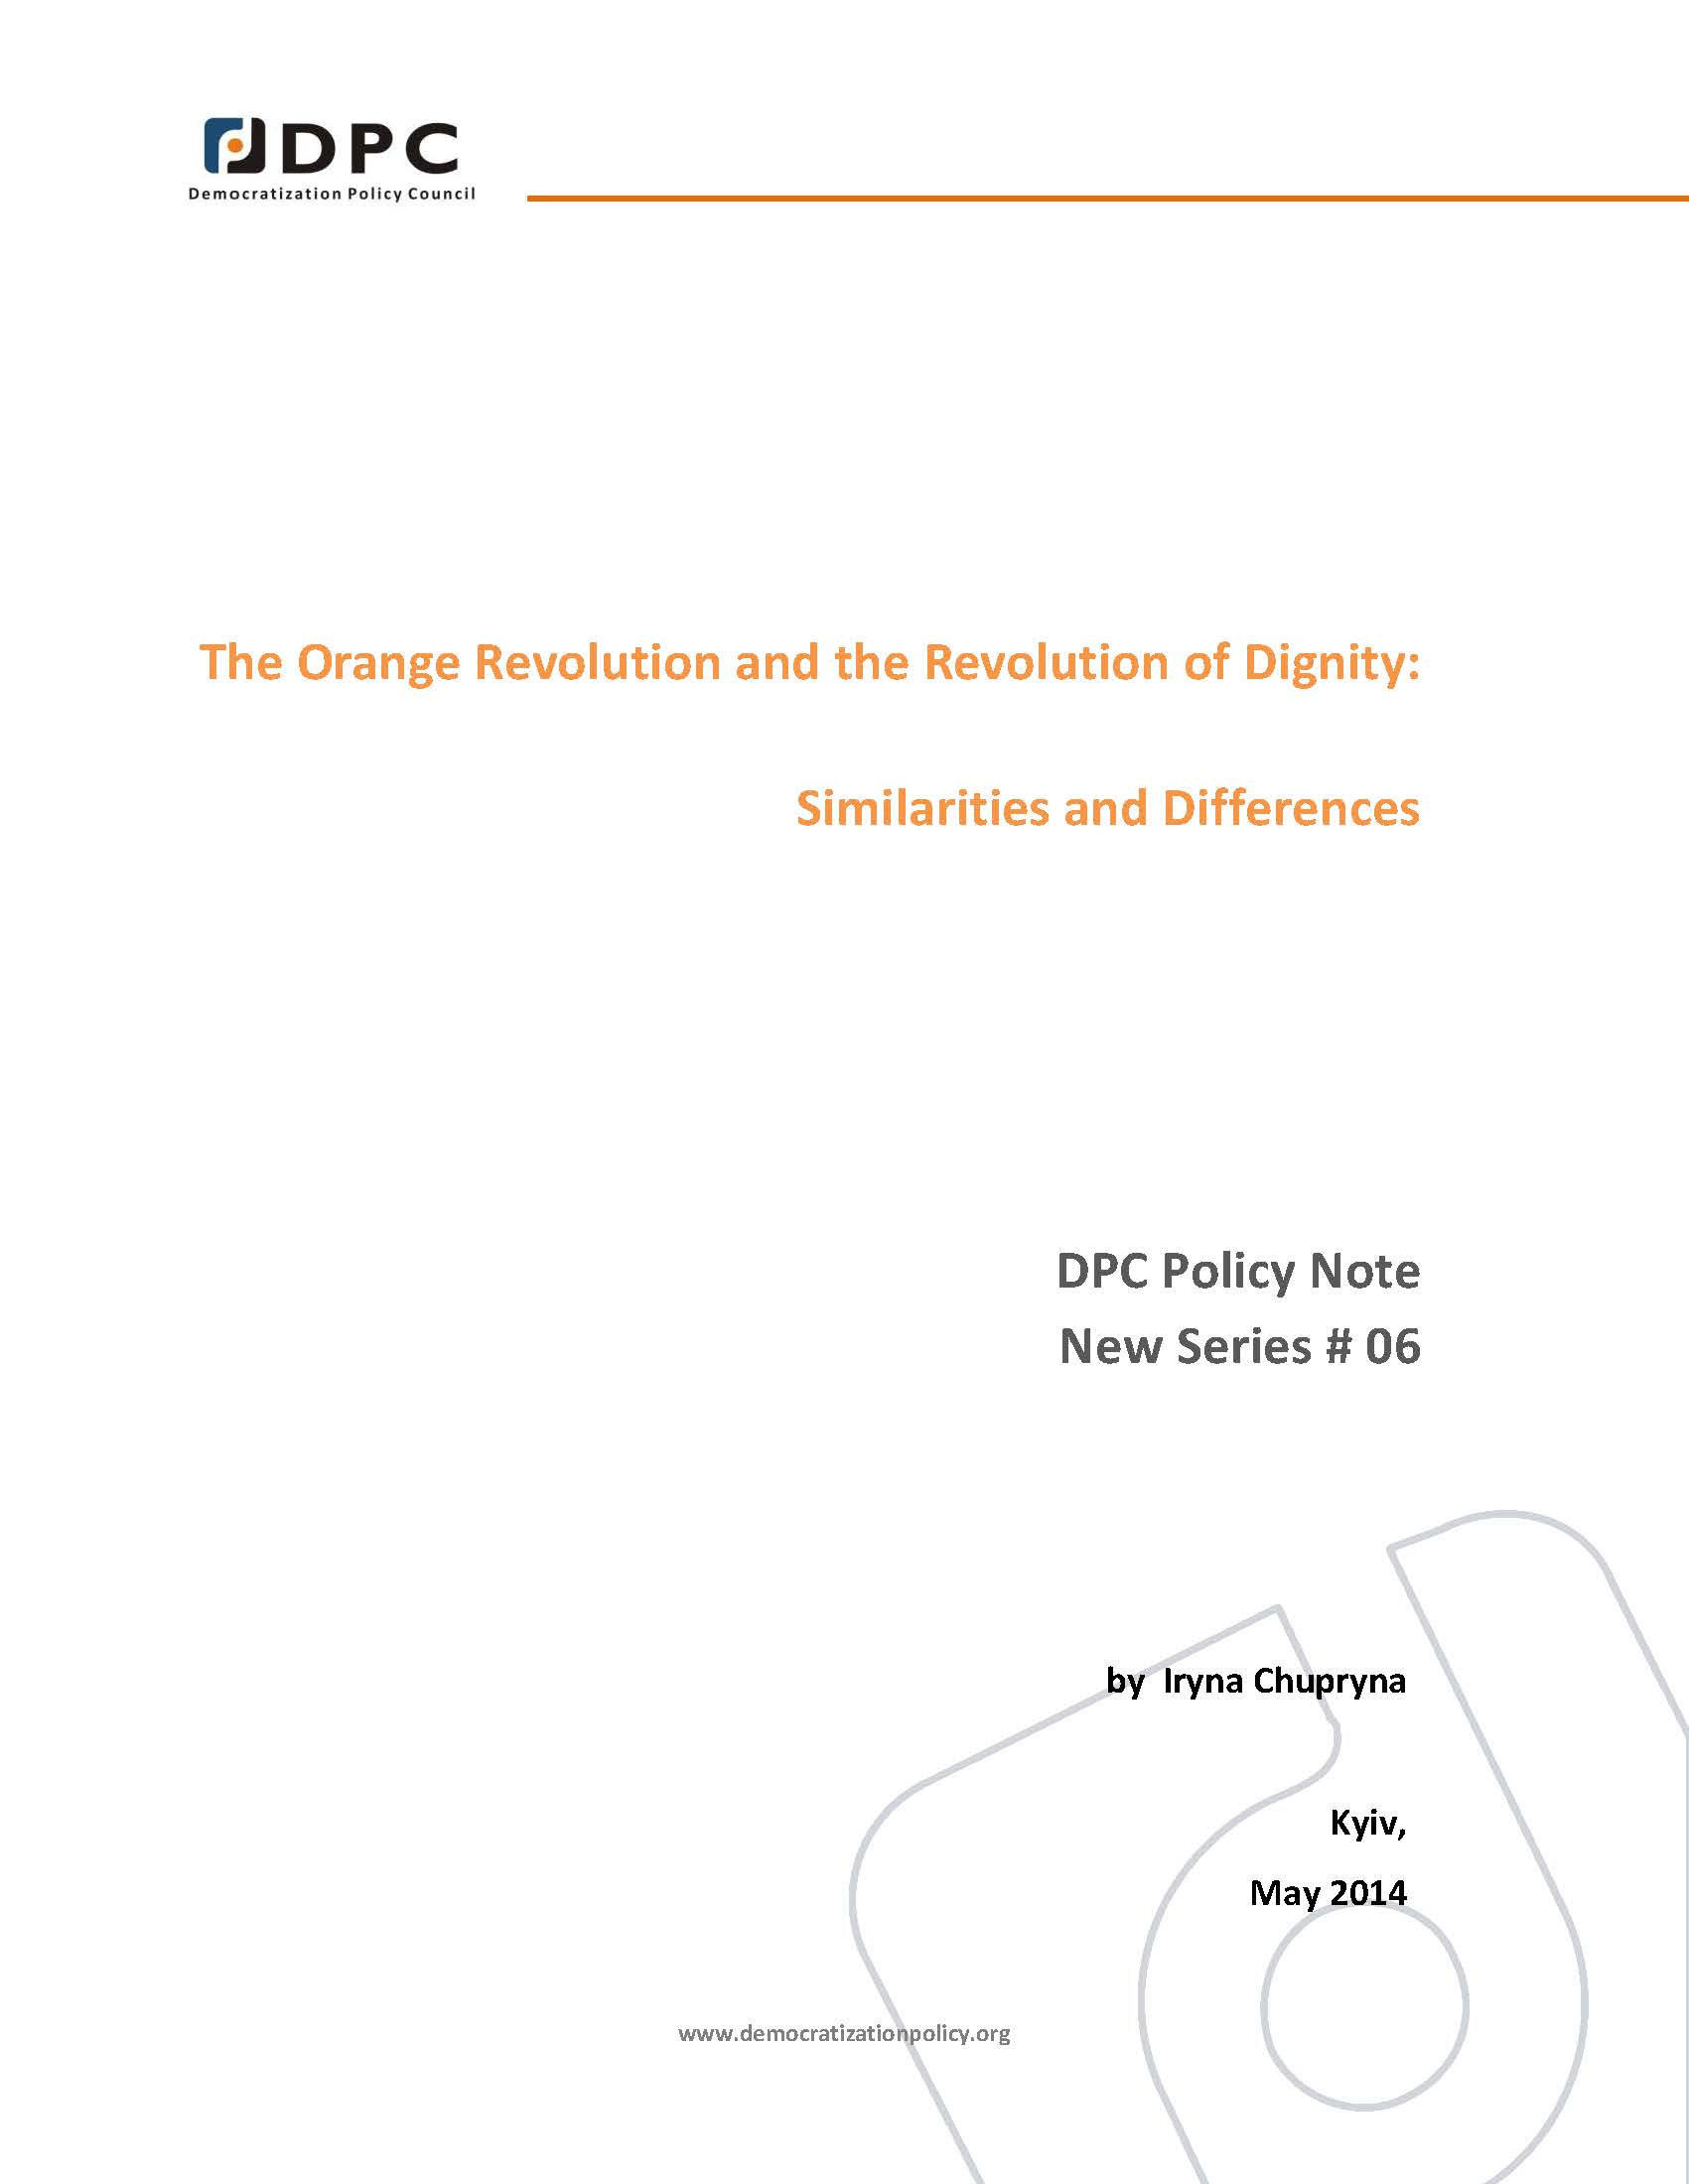 DPC POLICY NOTE 06: The Orange Revolution and the Revolution of Dignity: Similarities and Differences.